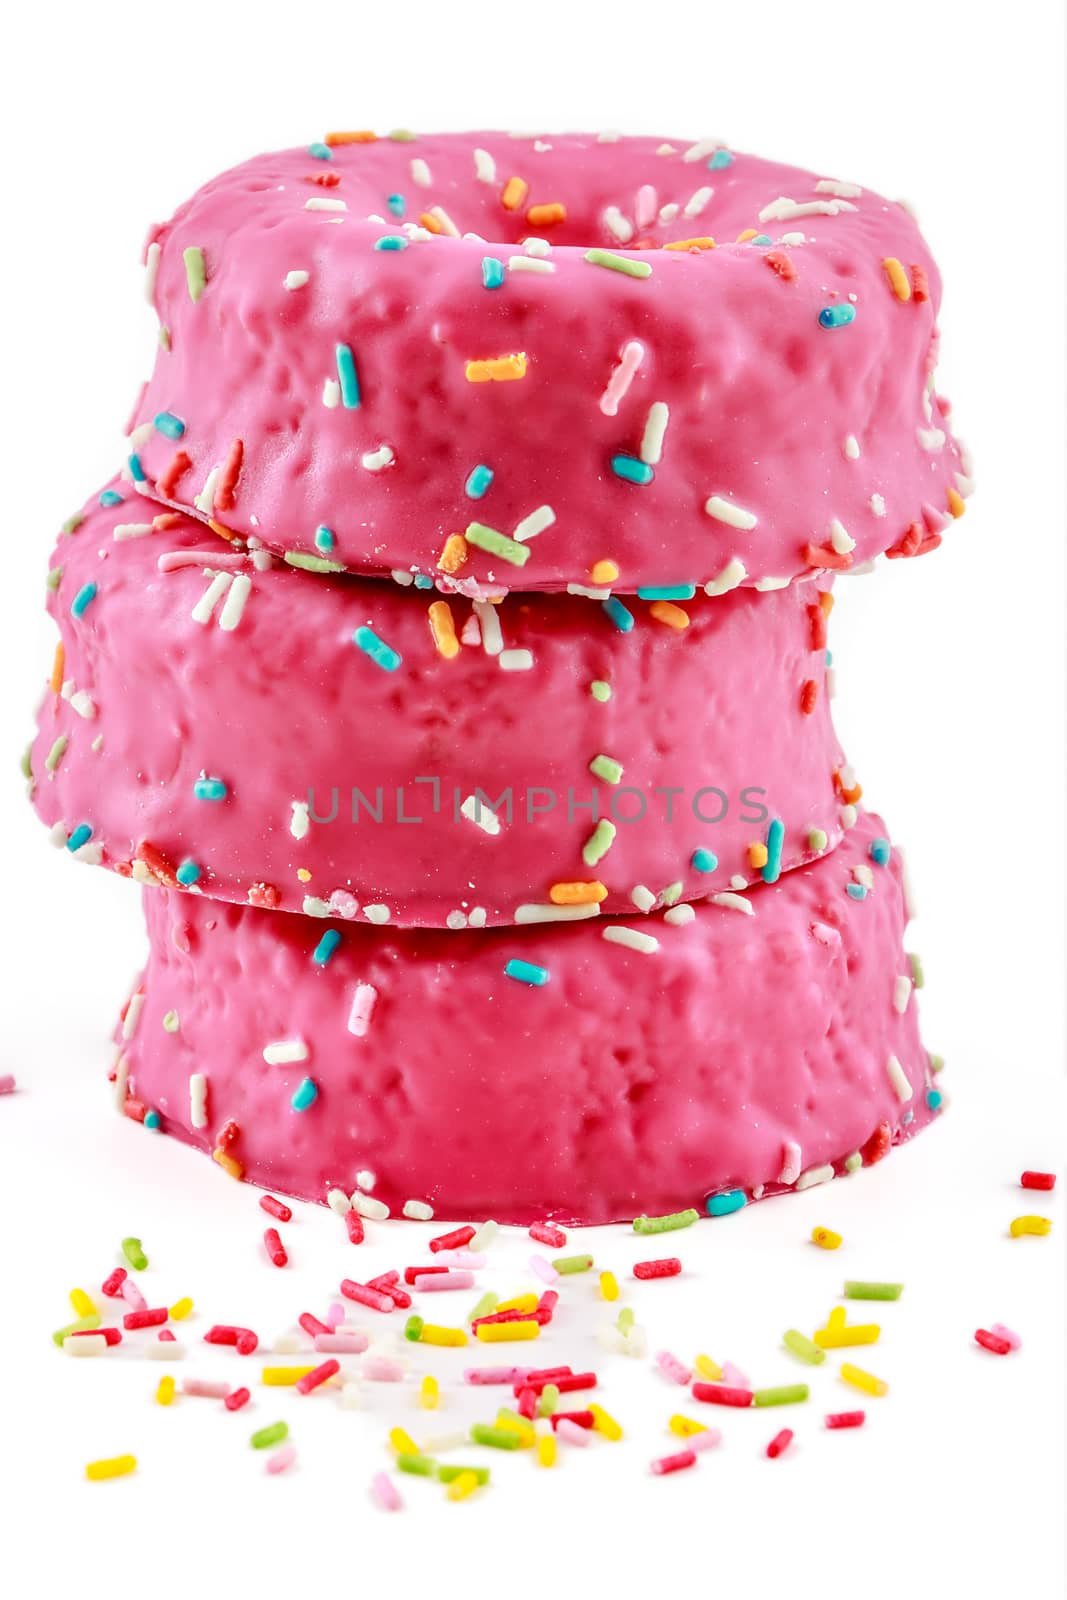 Strawberry donuts with chocolate shavings color on white background.Vertical image.